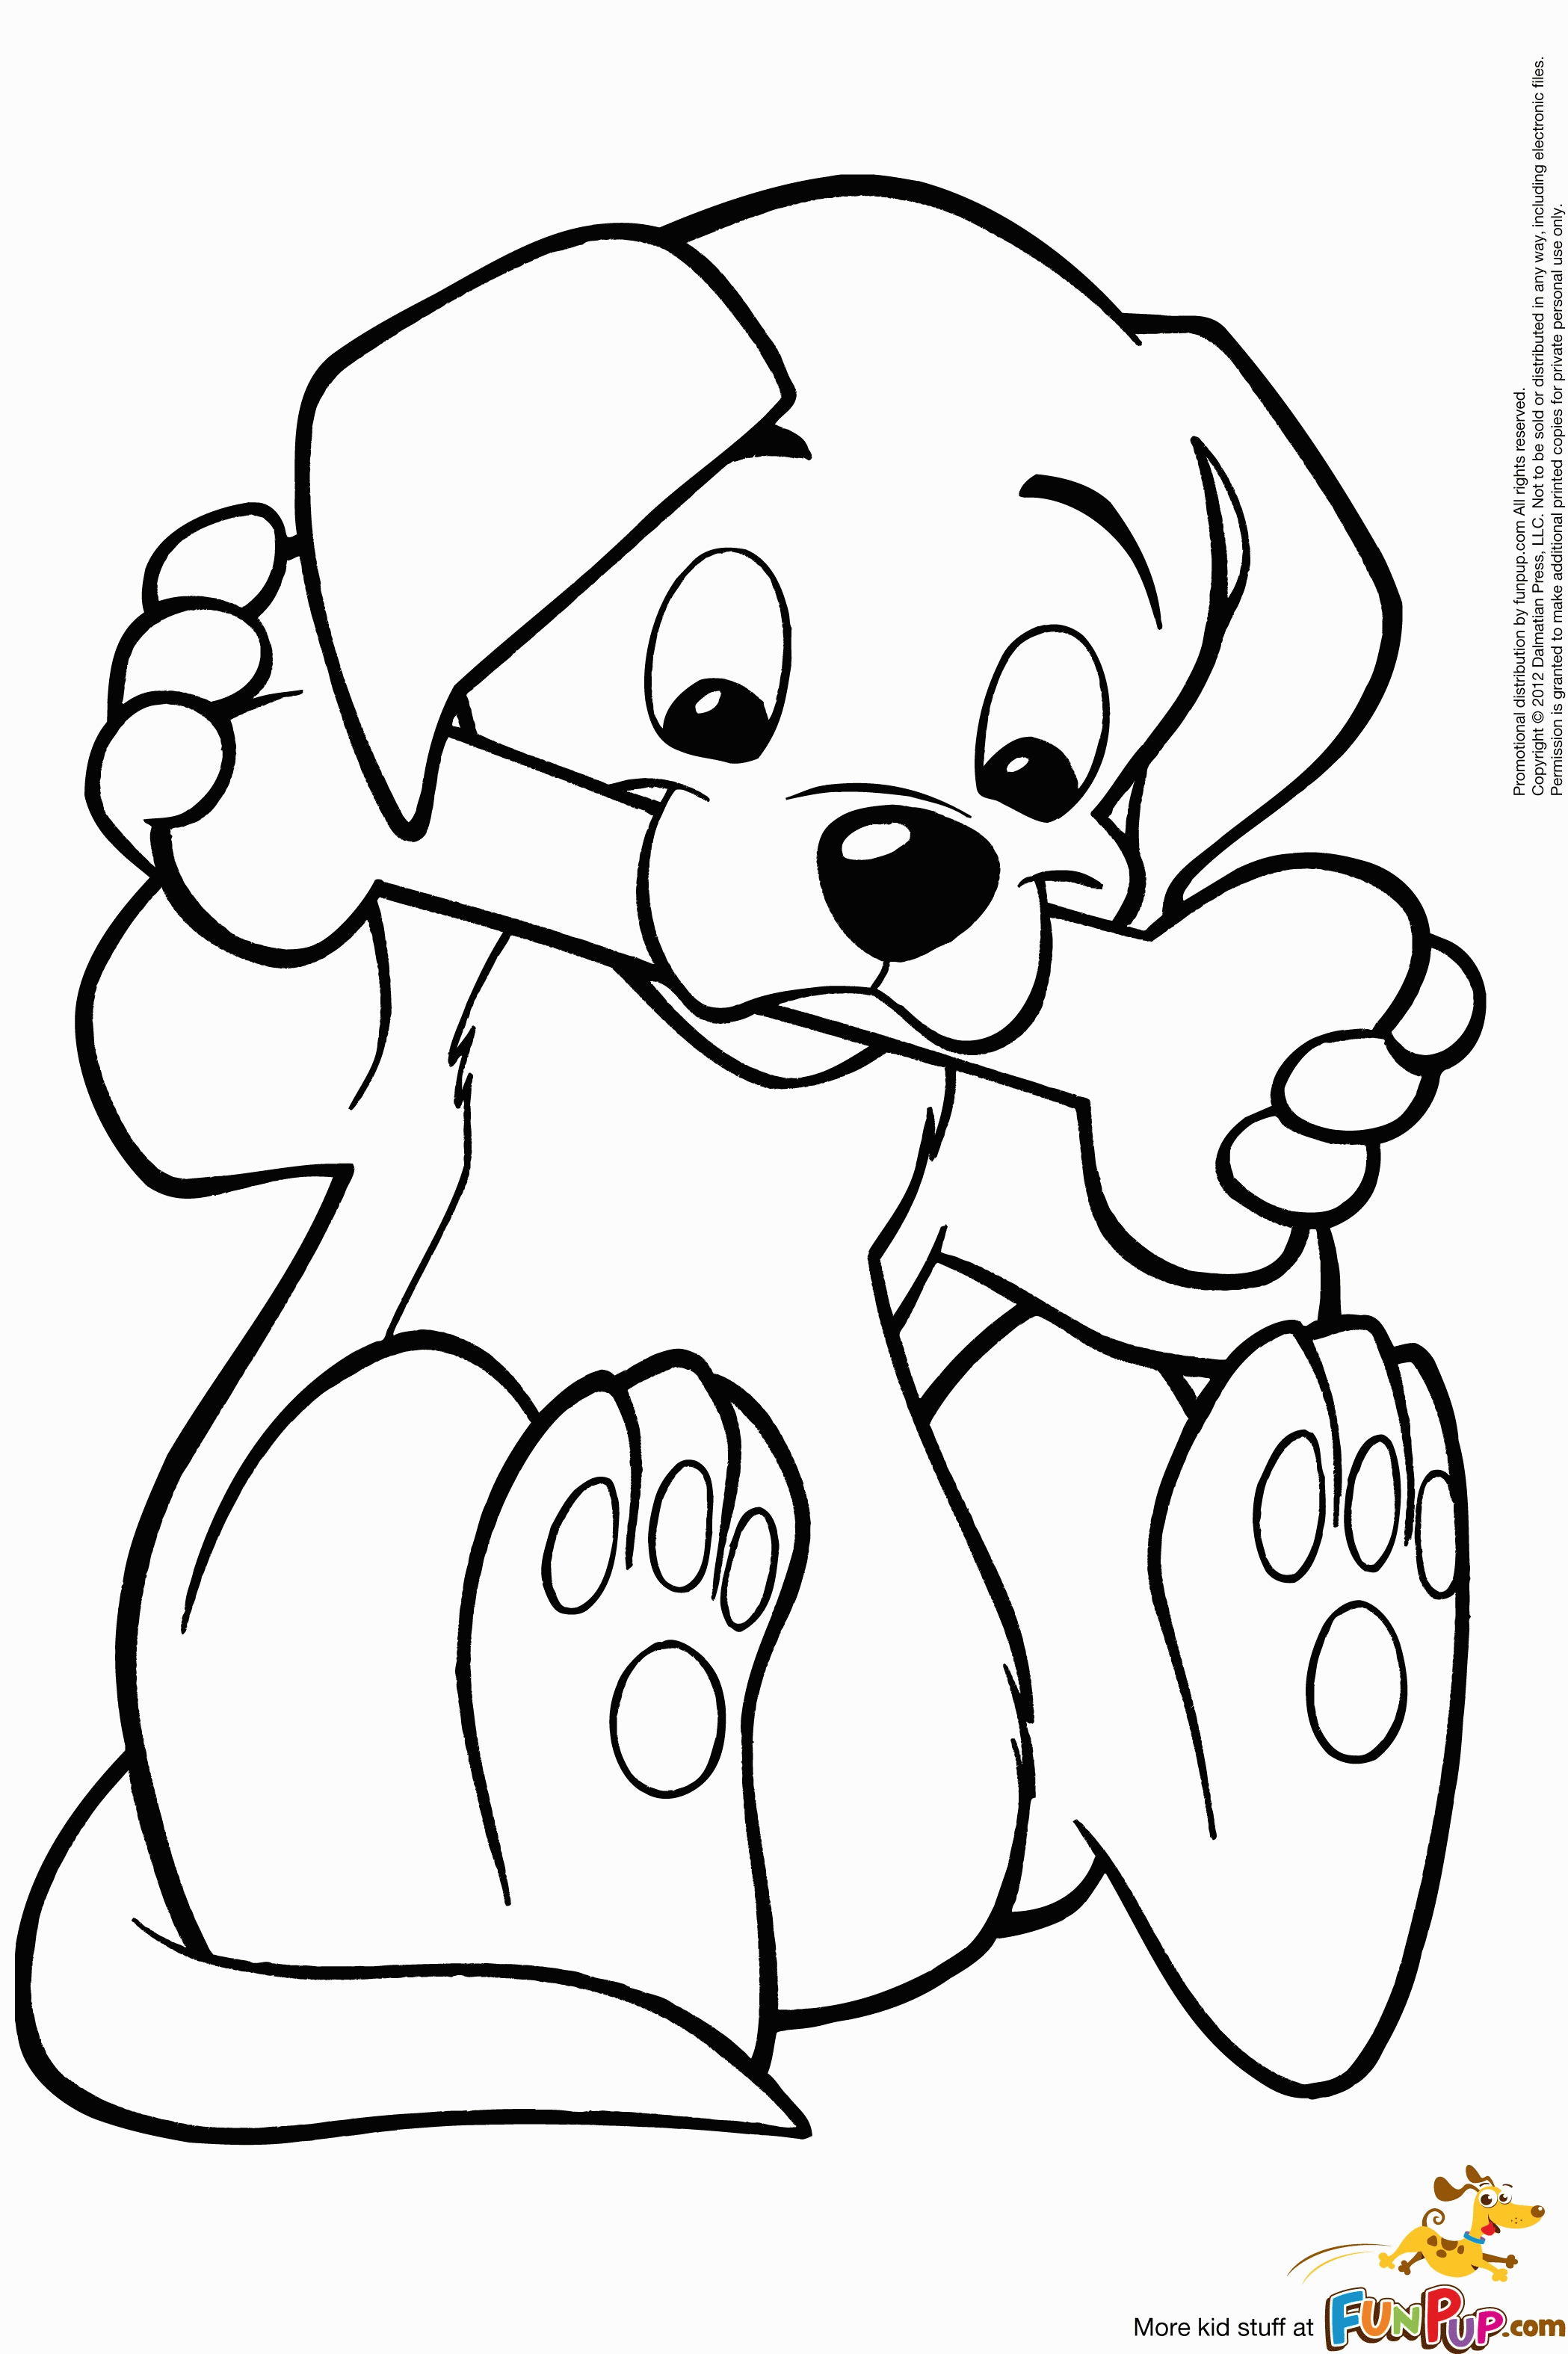 Puppy Coloring Pages - Bestofcoloring.com